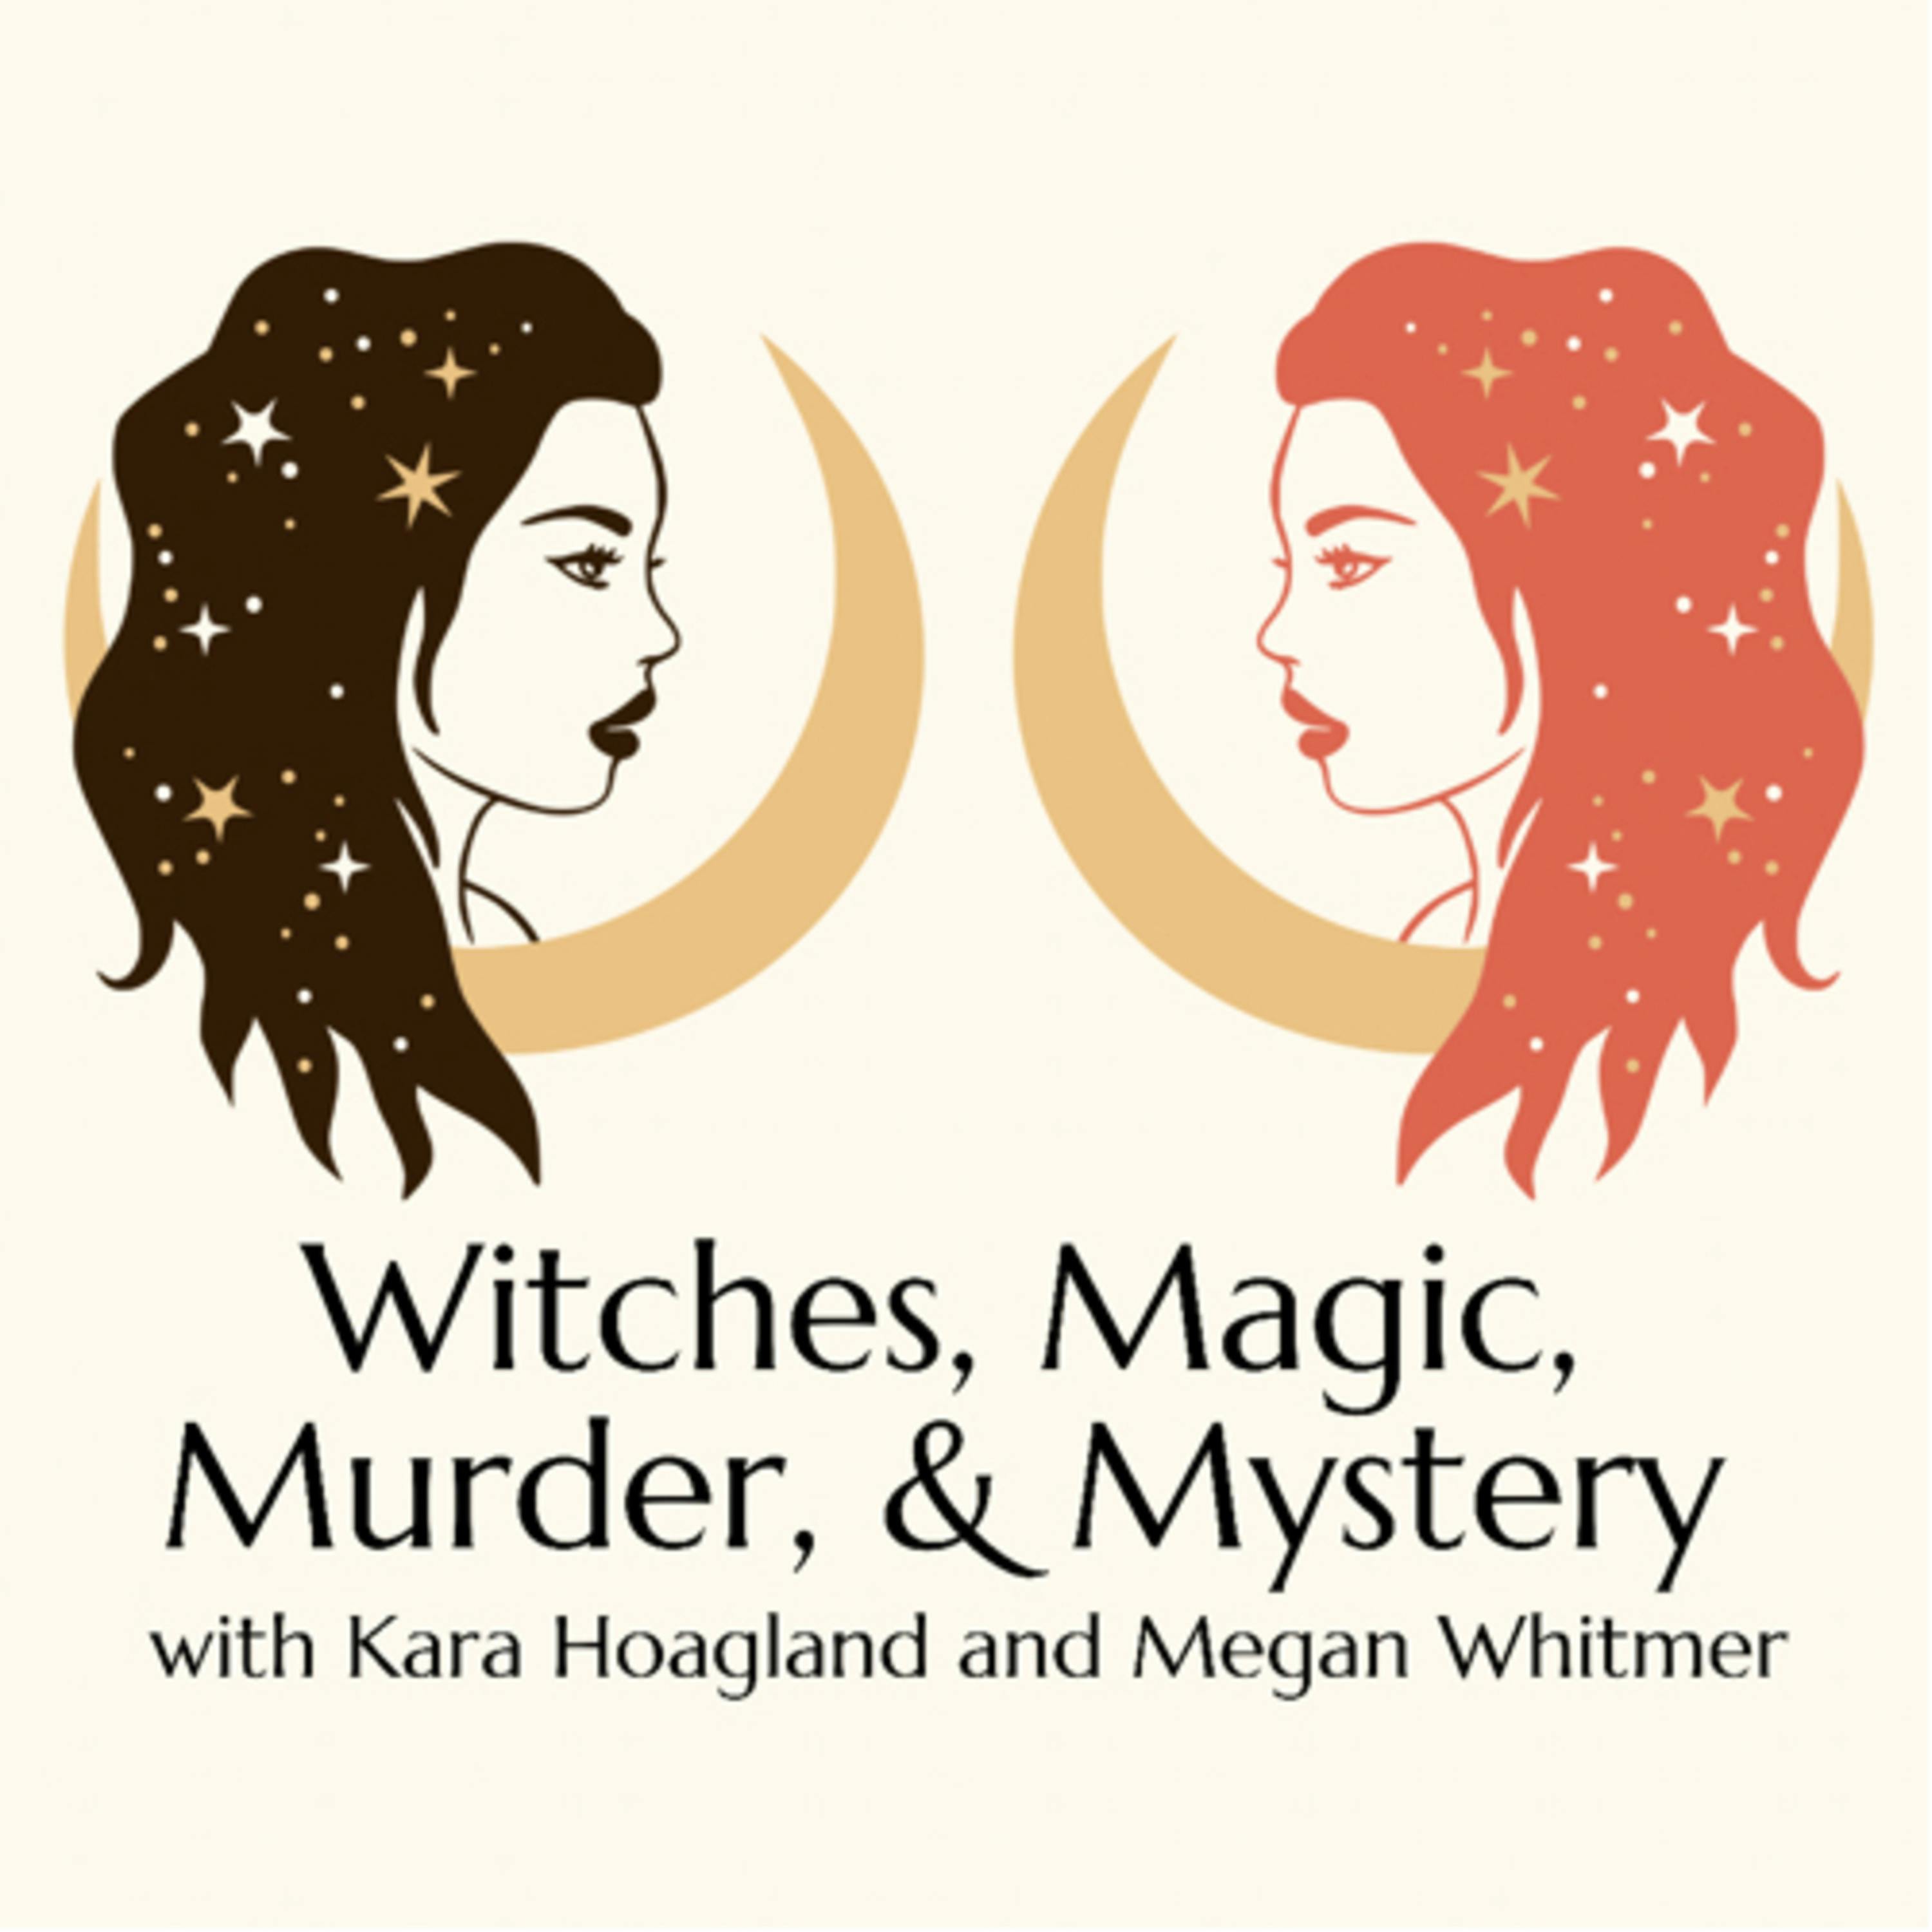 261. WITCH: July 19, 1692